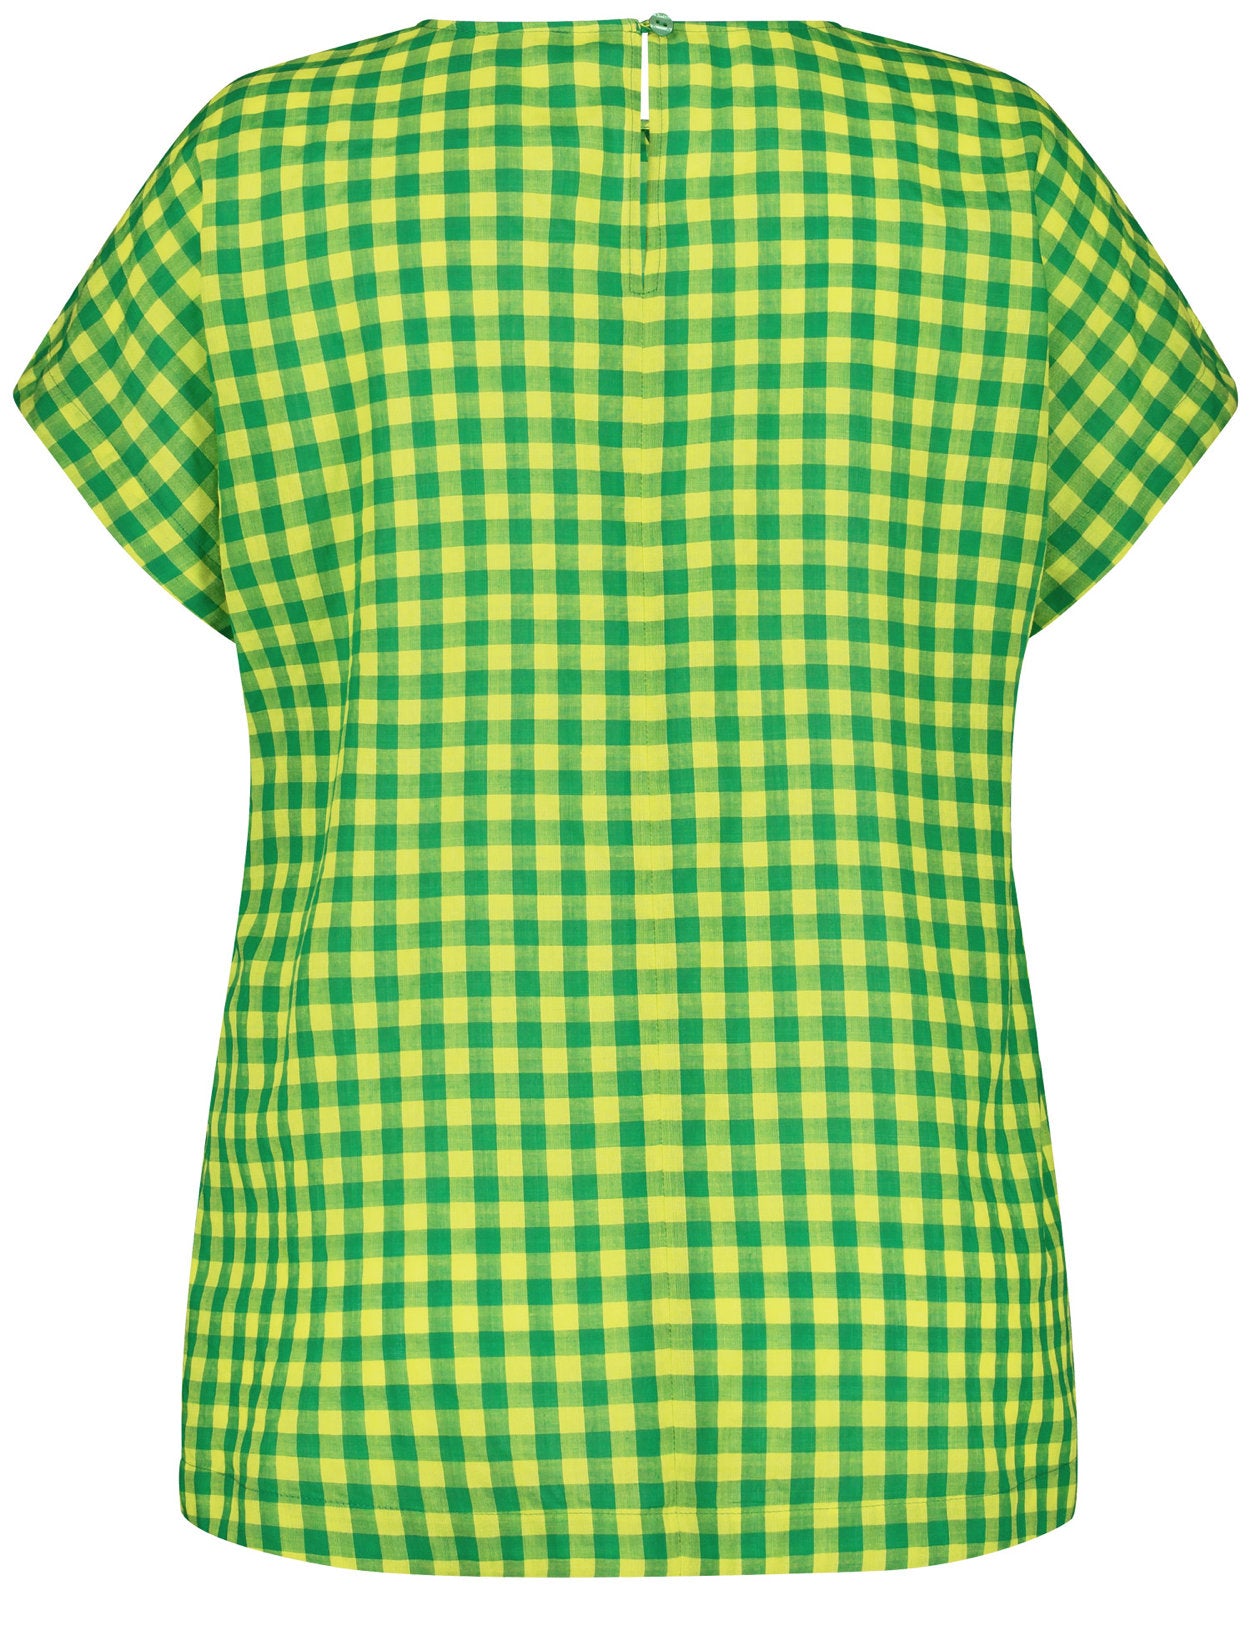 Blouse Top With A Check Pattern_460036-21061_5092_02